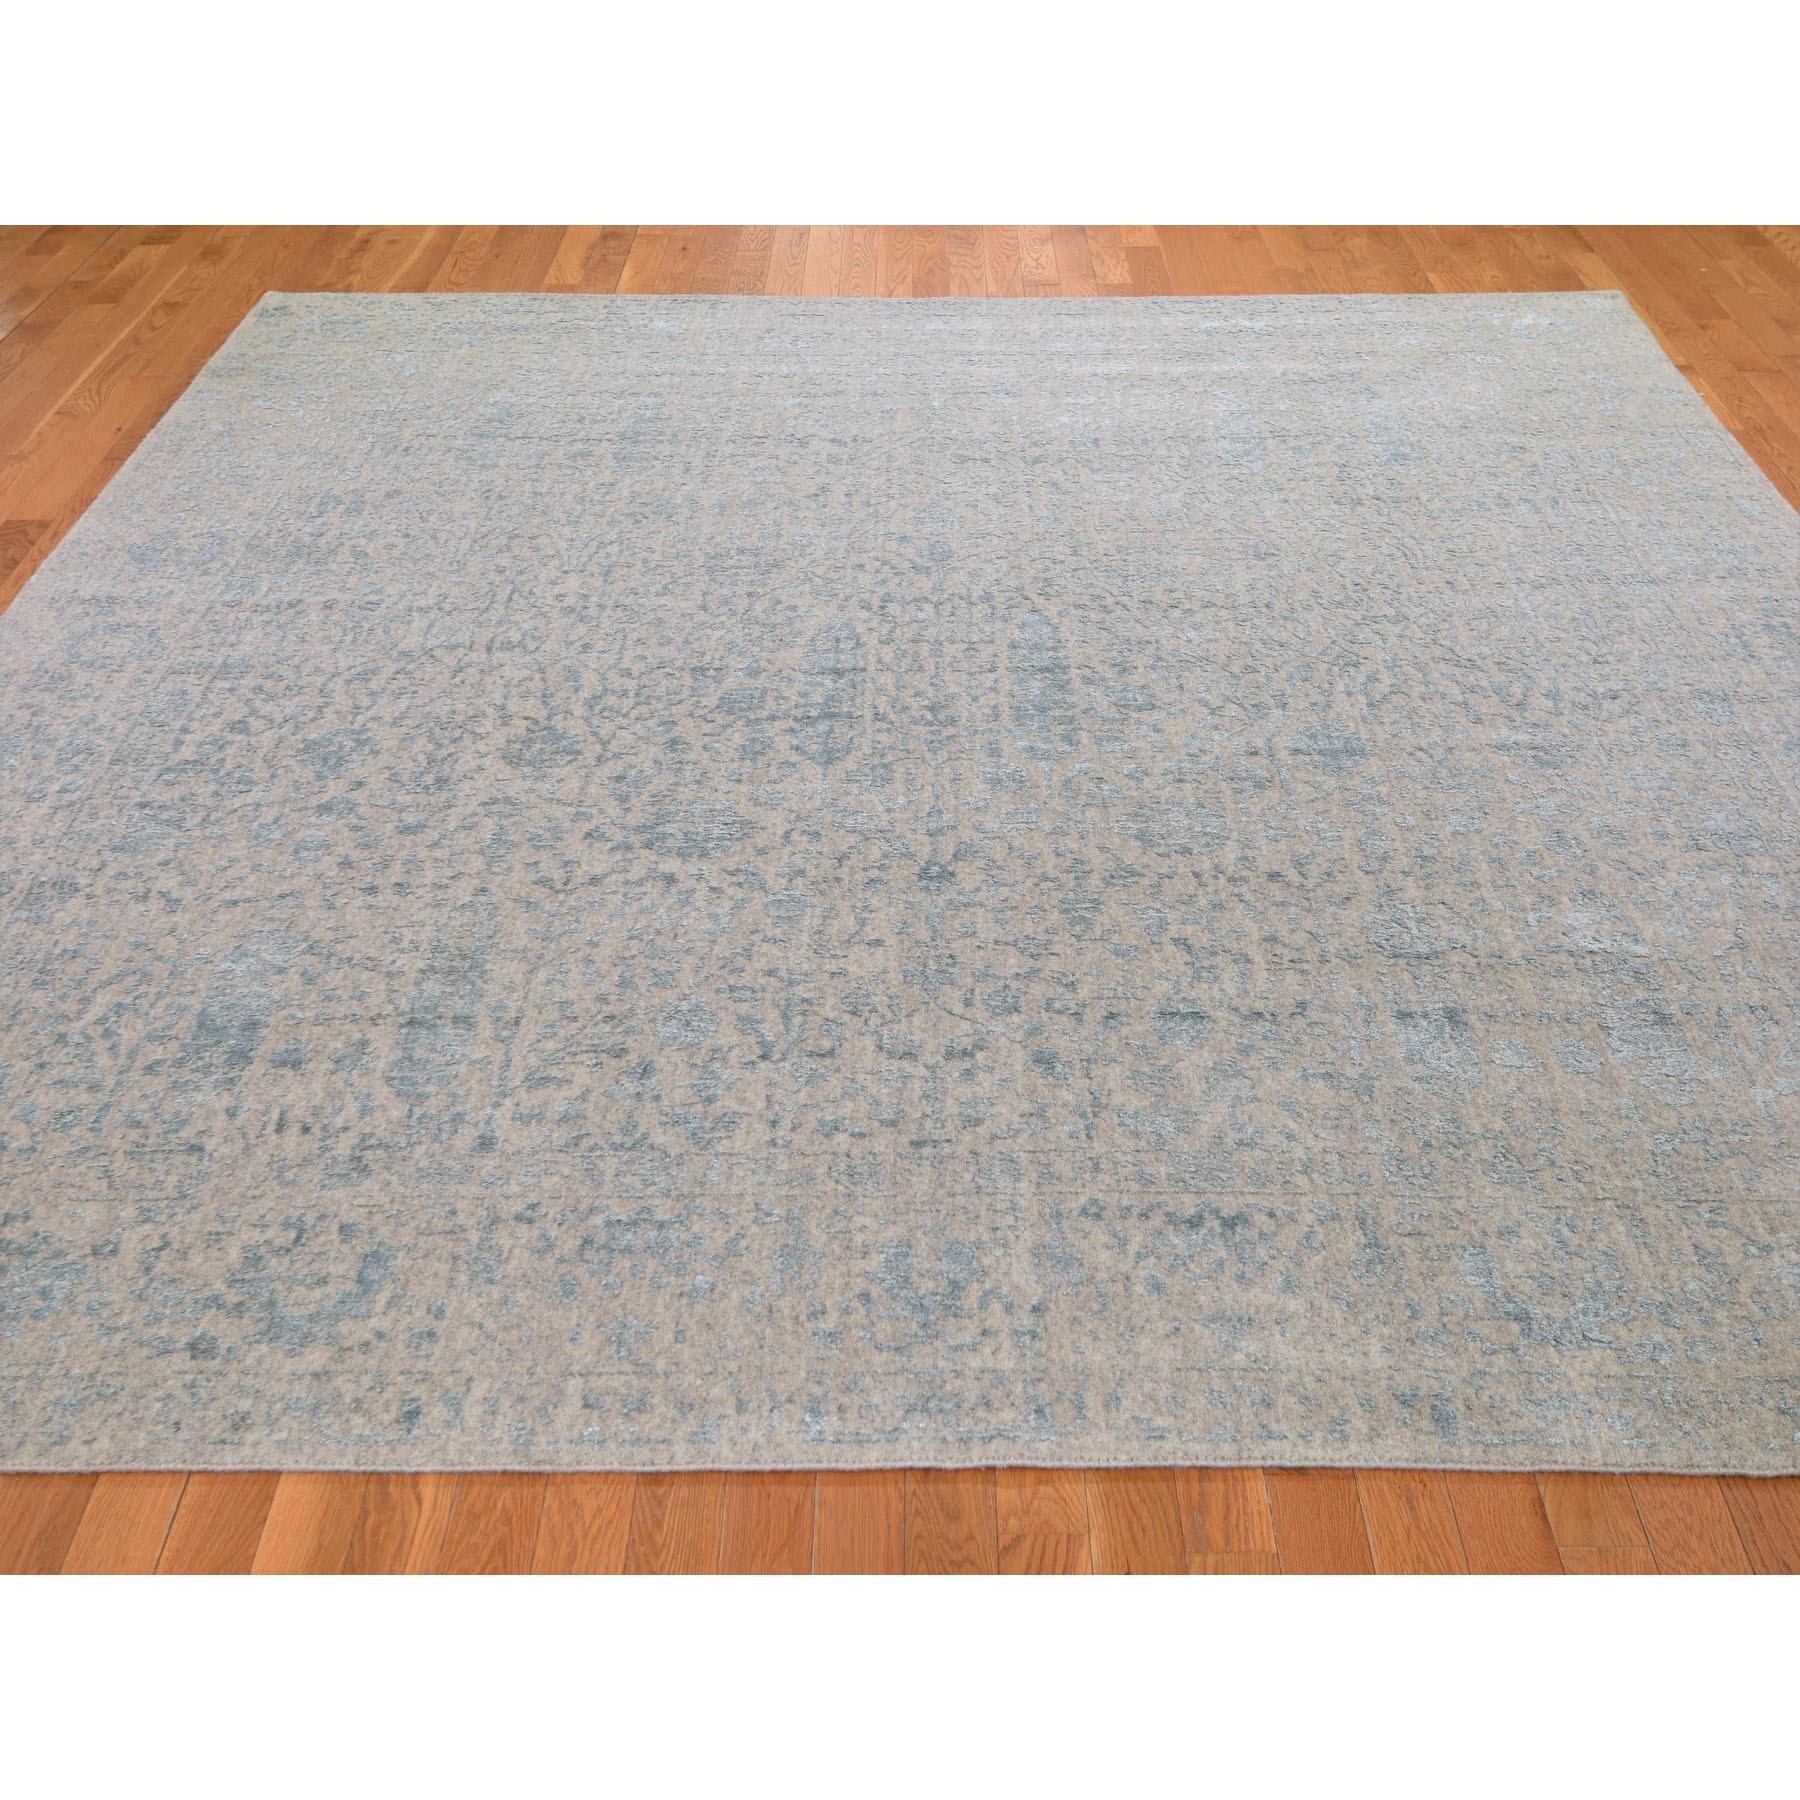 9-10 x9-10   Square Gray Broken Cypress Tree Design Wool And Silk Thick Hand Loomed Oriental Rug 